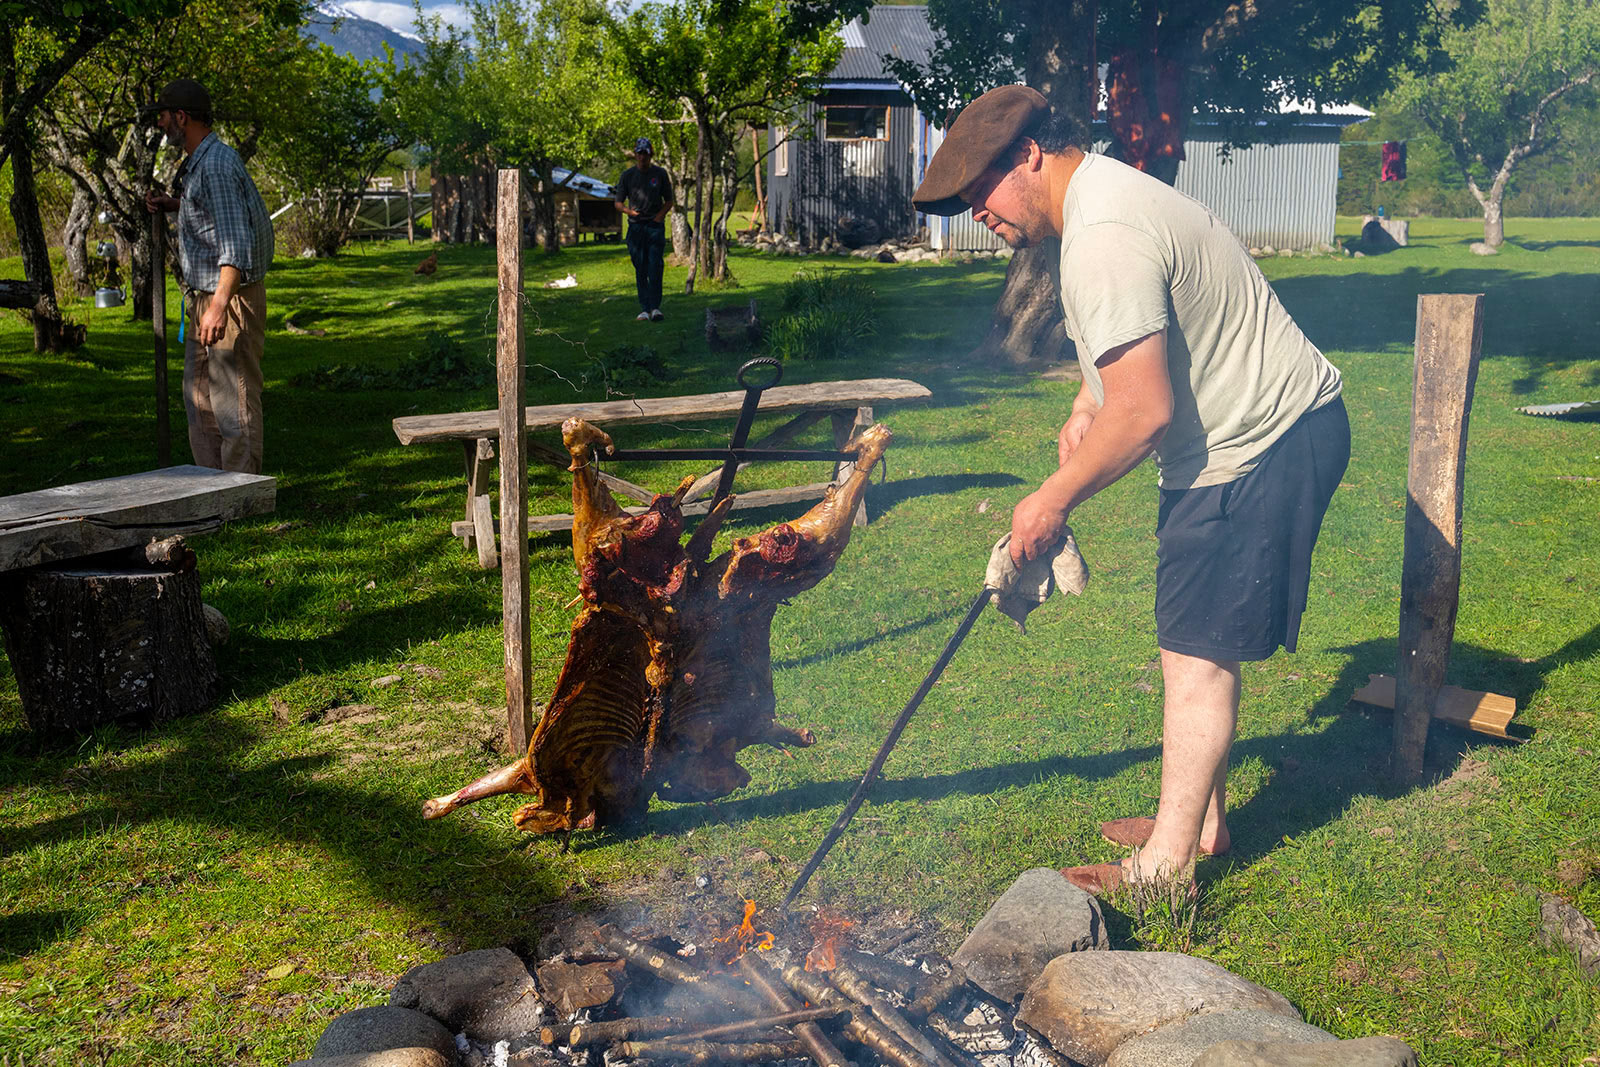 A man stands over an open fire cooking meat in Patagonia, Chile.